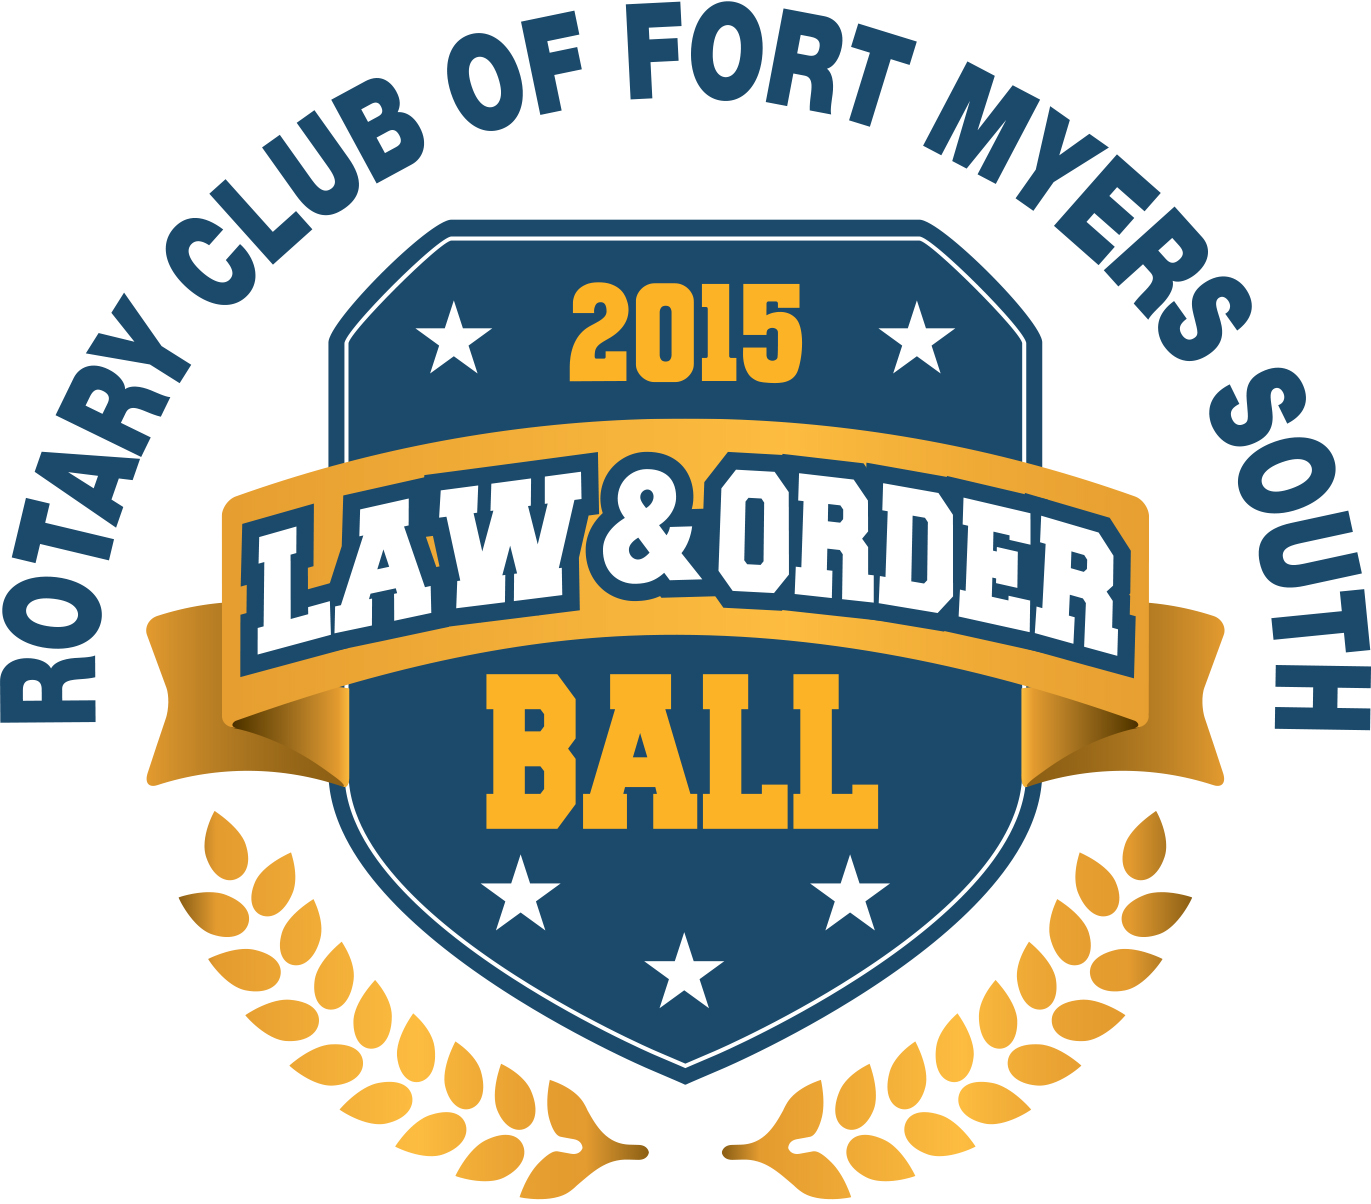 Officer of the Year Finalists Announced for Law and Order Ball